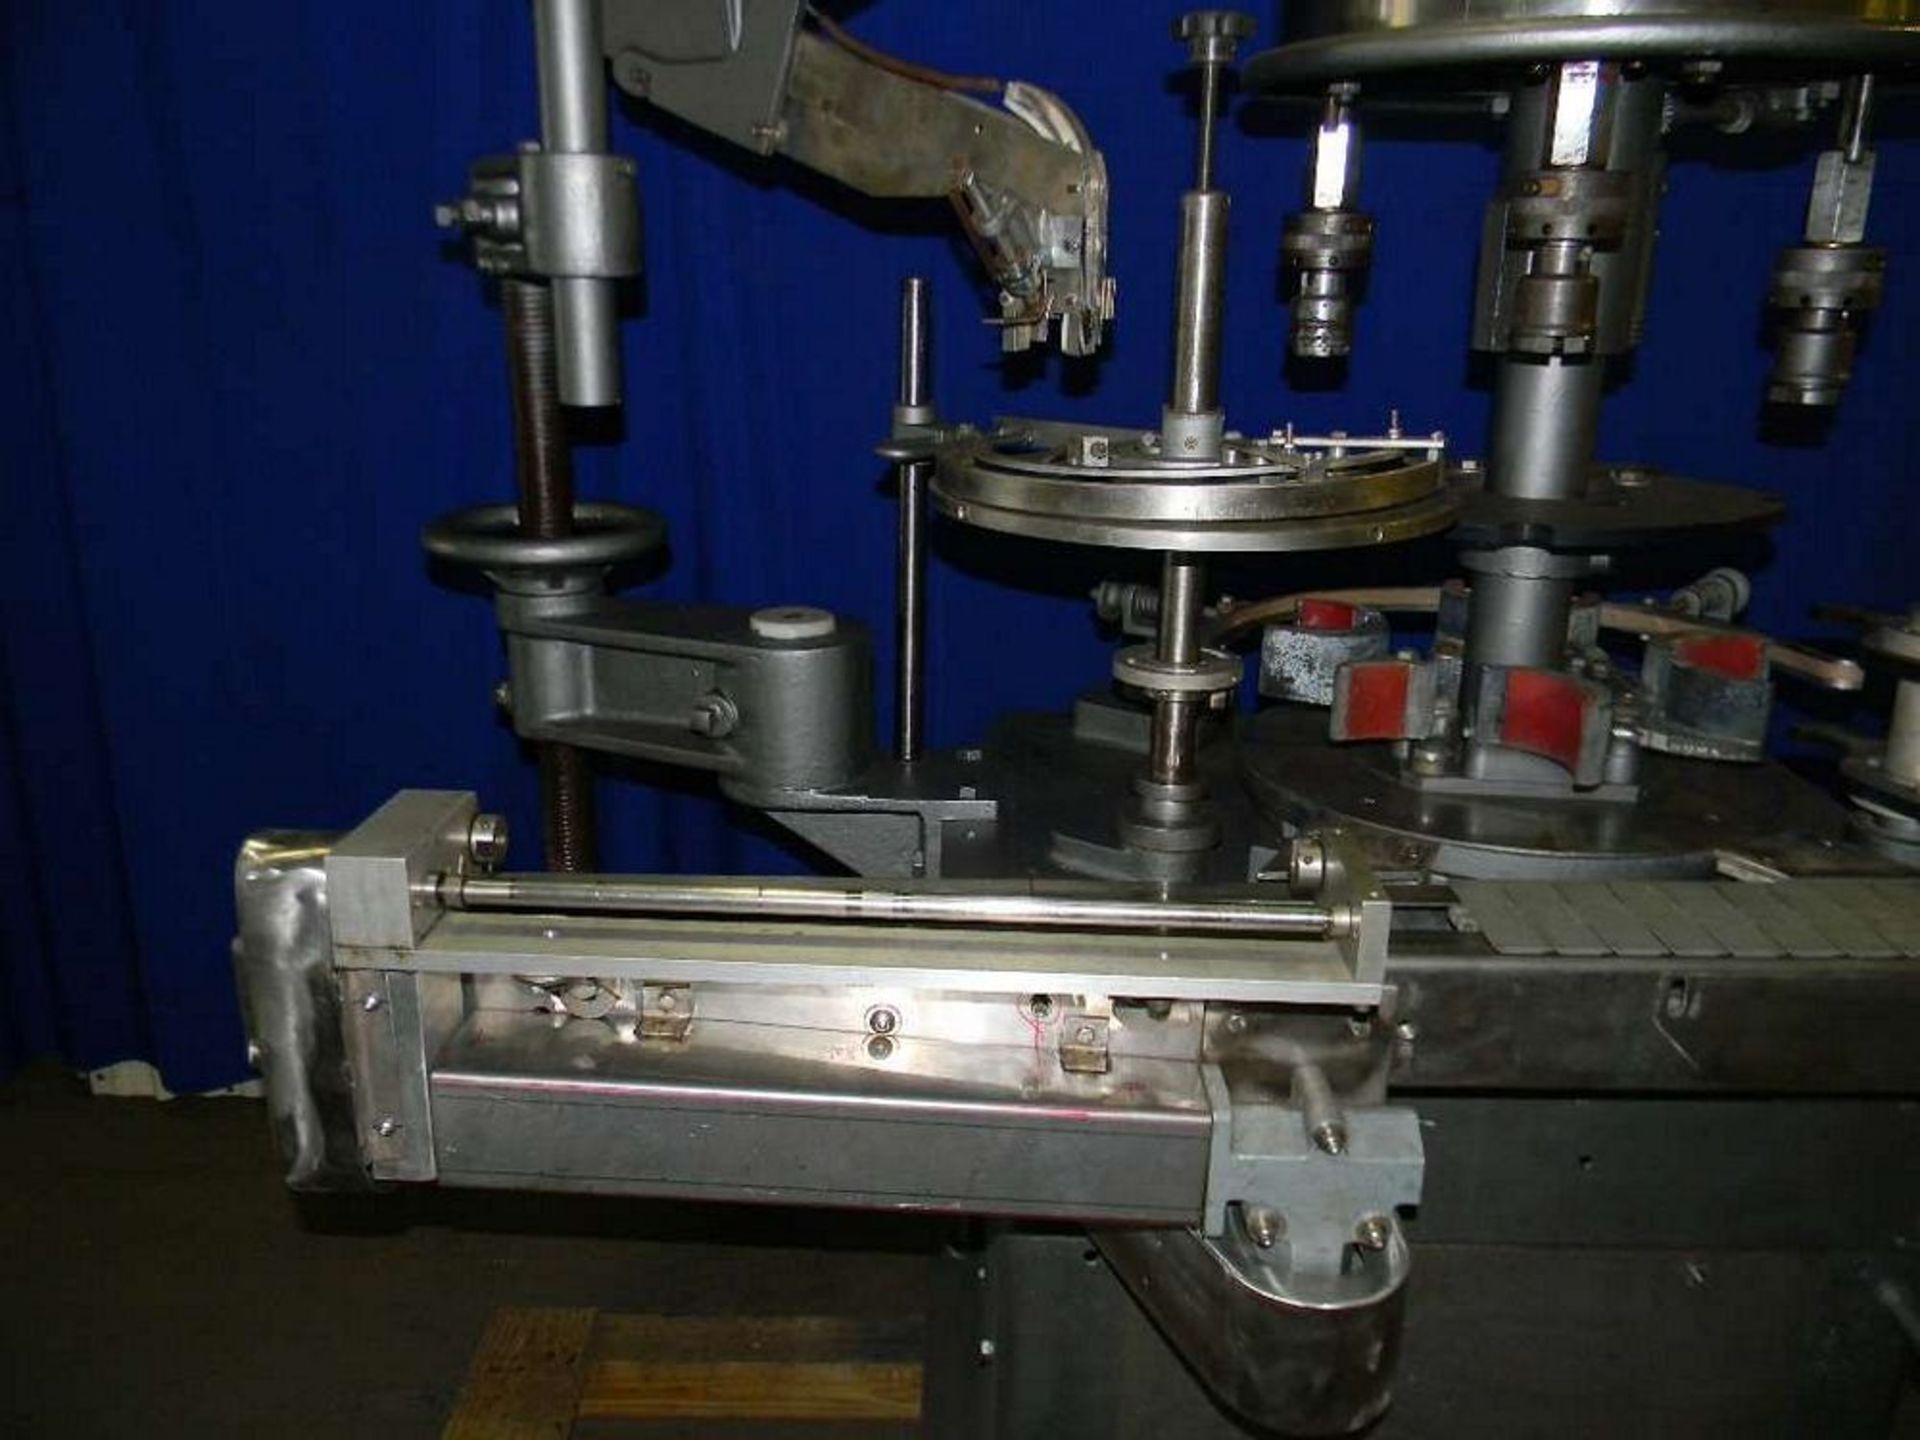 Qty (1) Consolidated D4FA 4 Head Rotary Screw Capper - Consolidated Model D4FA Rotary Screw Capper - - Image 4 of 5